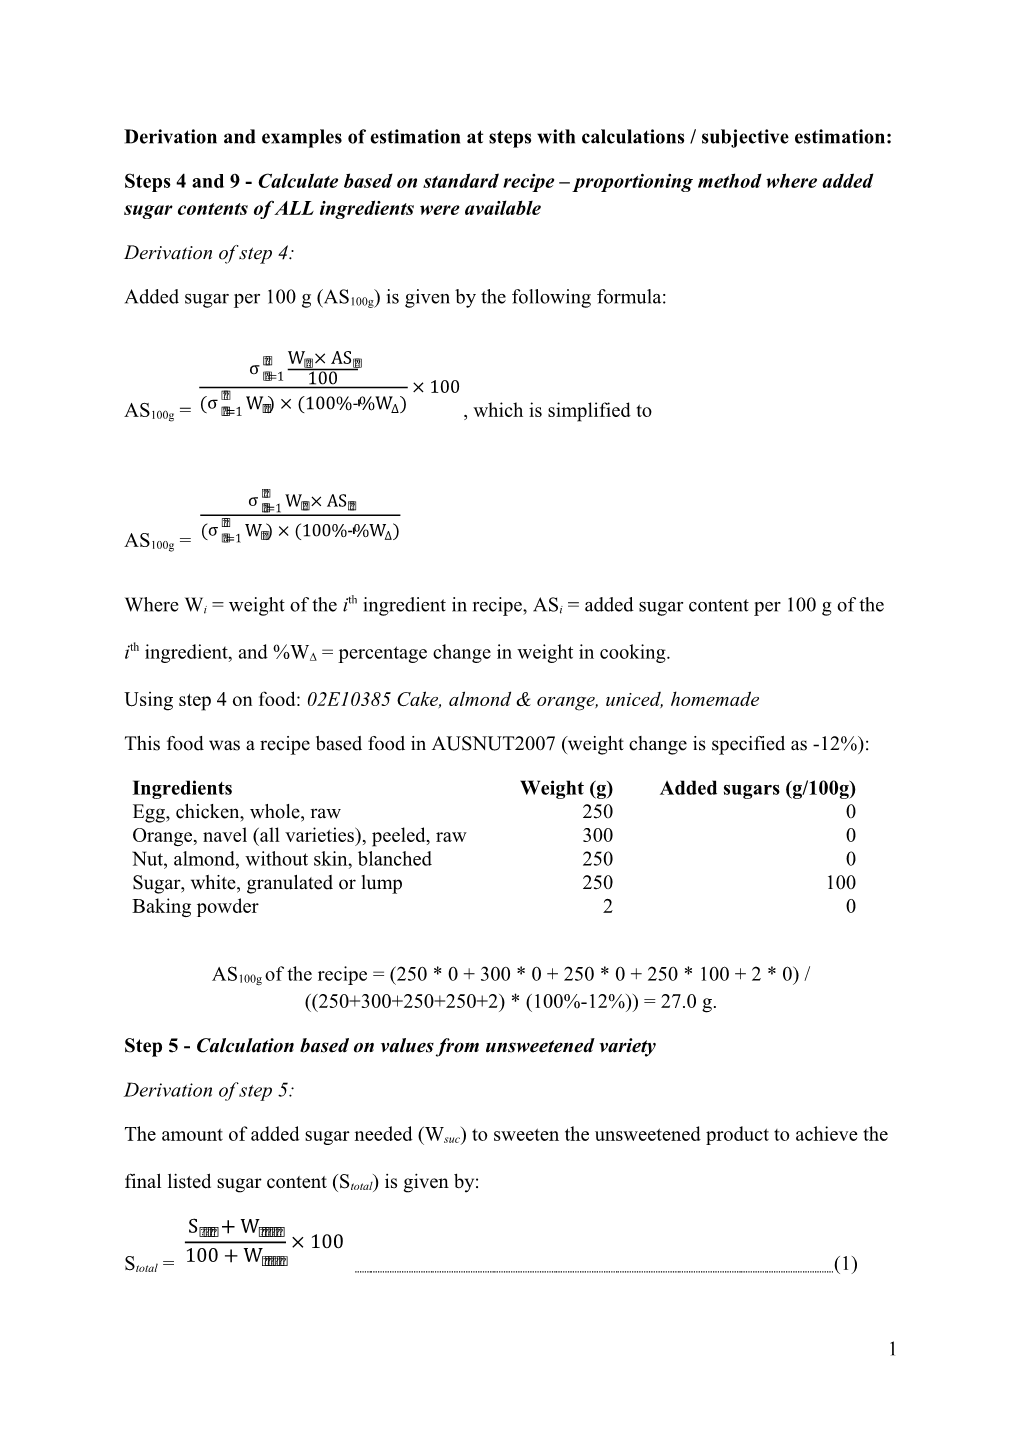 Derivation and Examples of Estimation at Steps with Calculations / Subjective Estimation